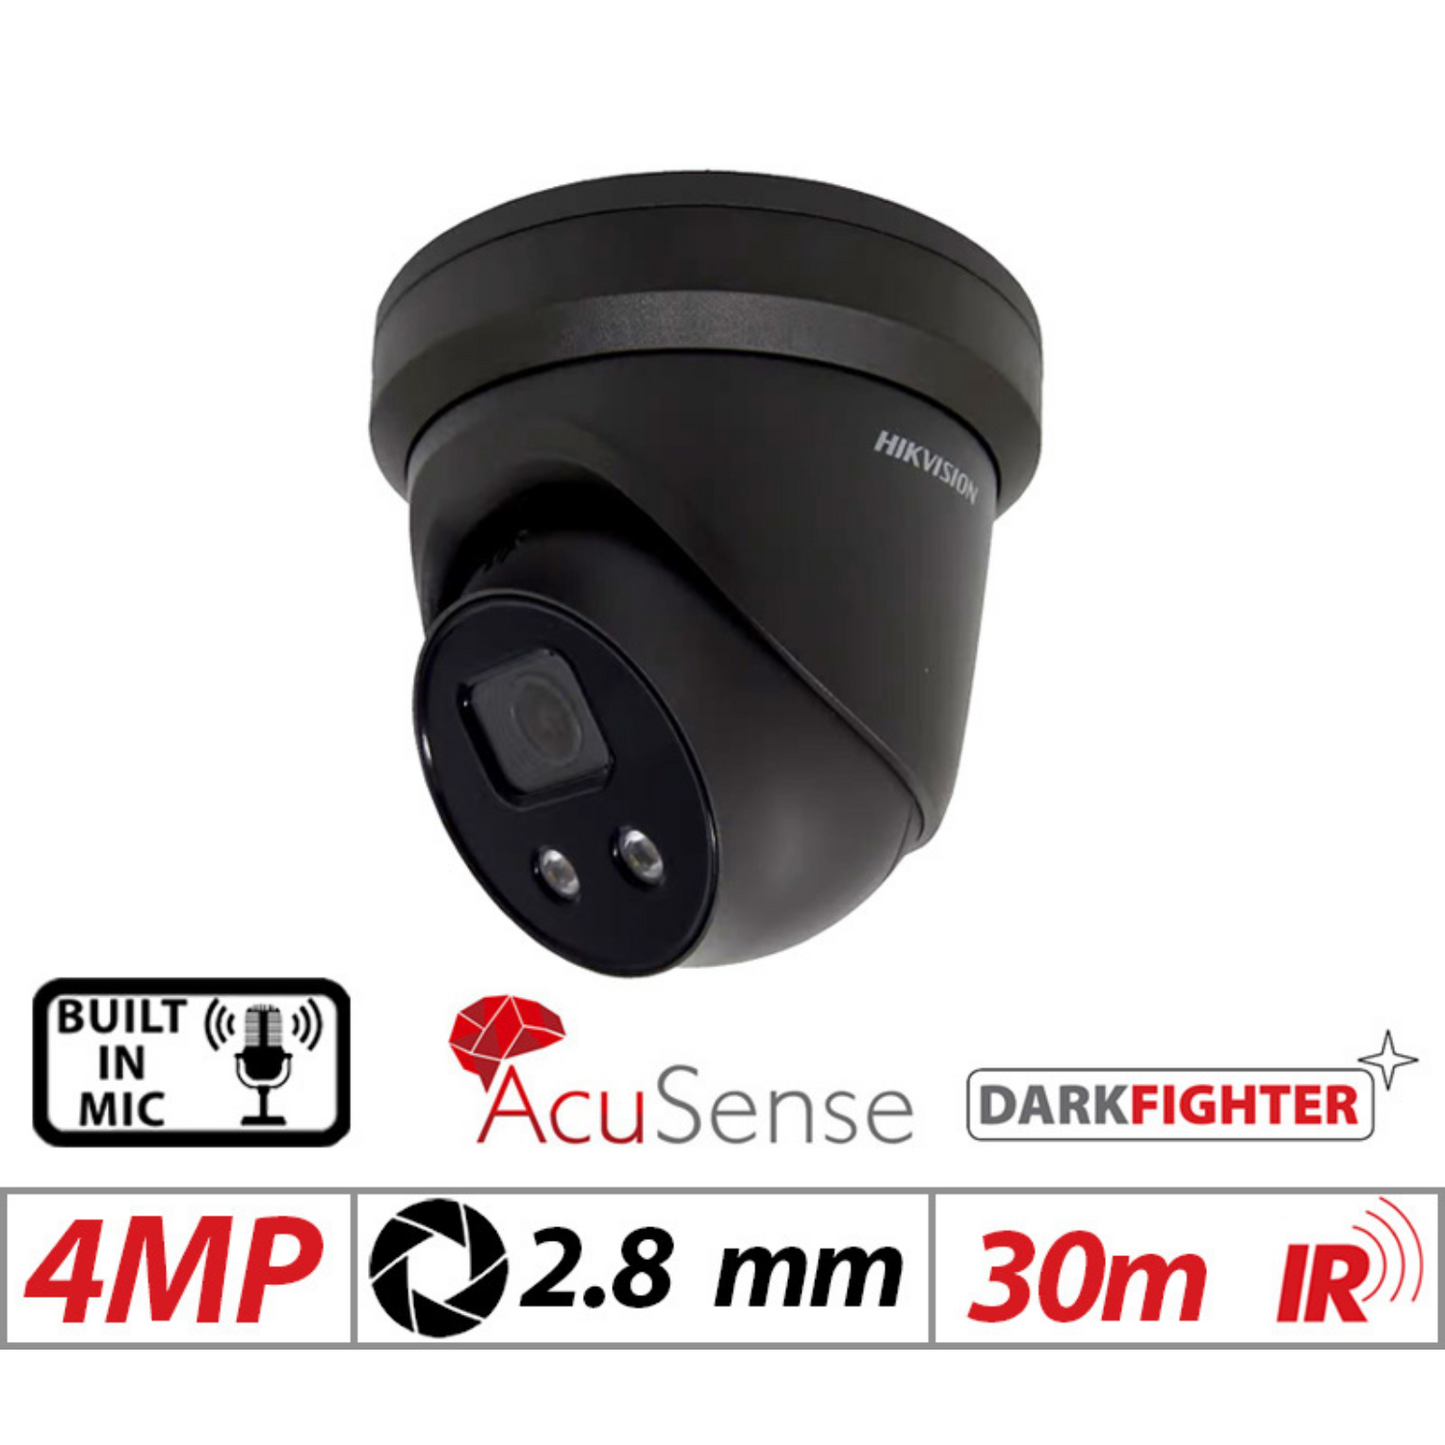 4mp Hikvision Darkfighter Acusense Fixed Turret IP Network Camera with Built-in Mic 2.8mm Black DS-2CD2346G2-IU